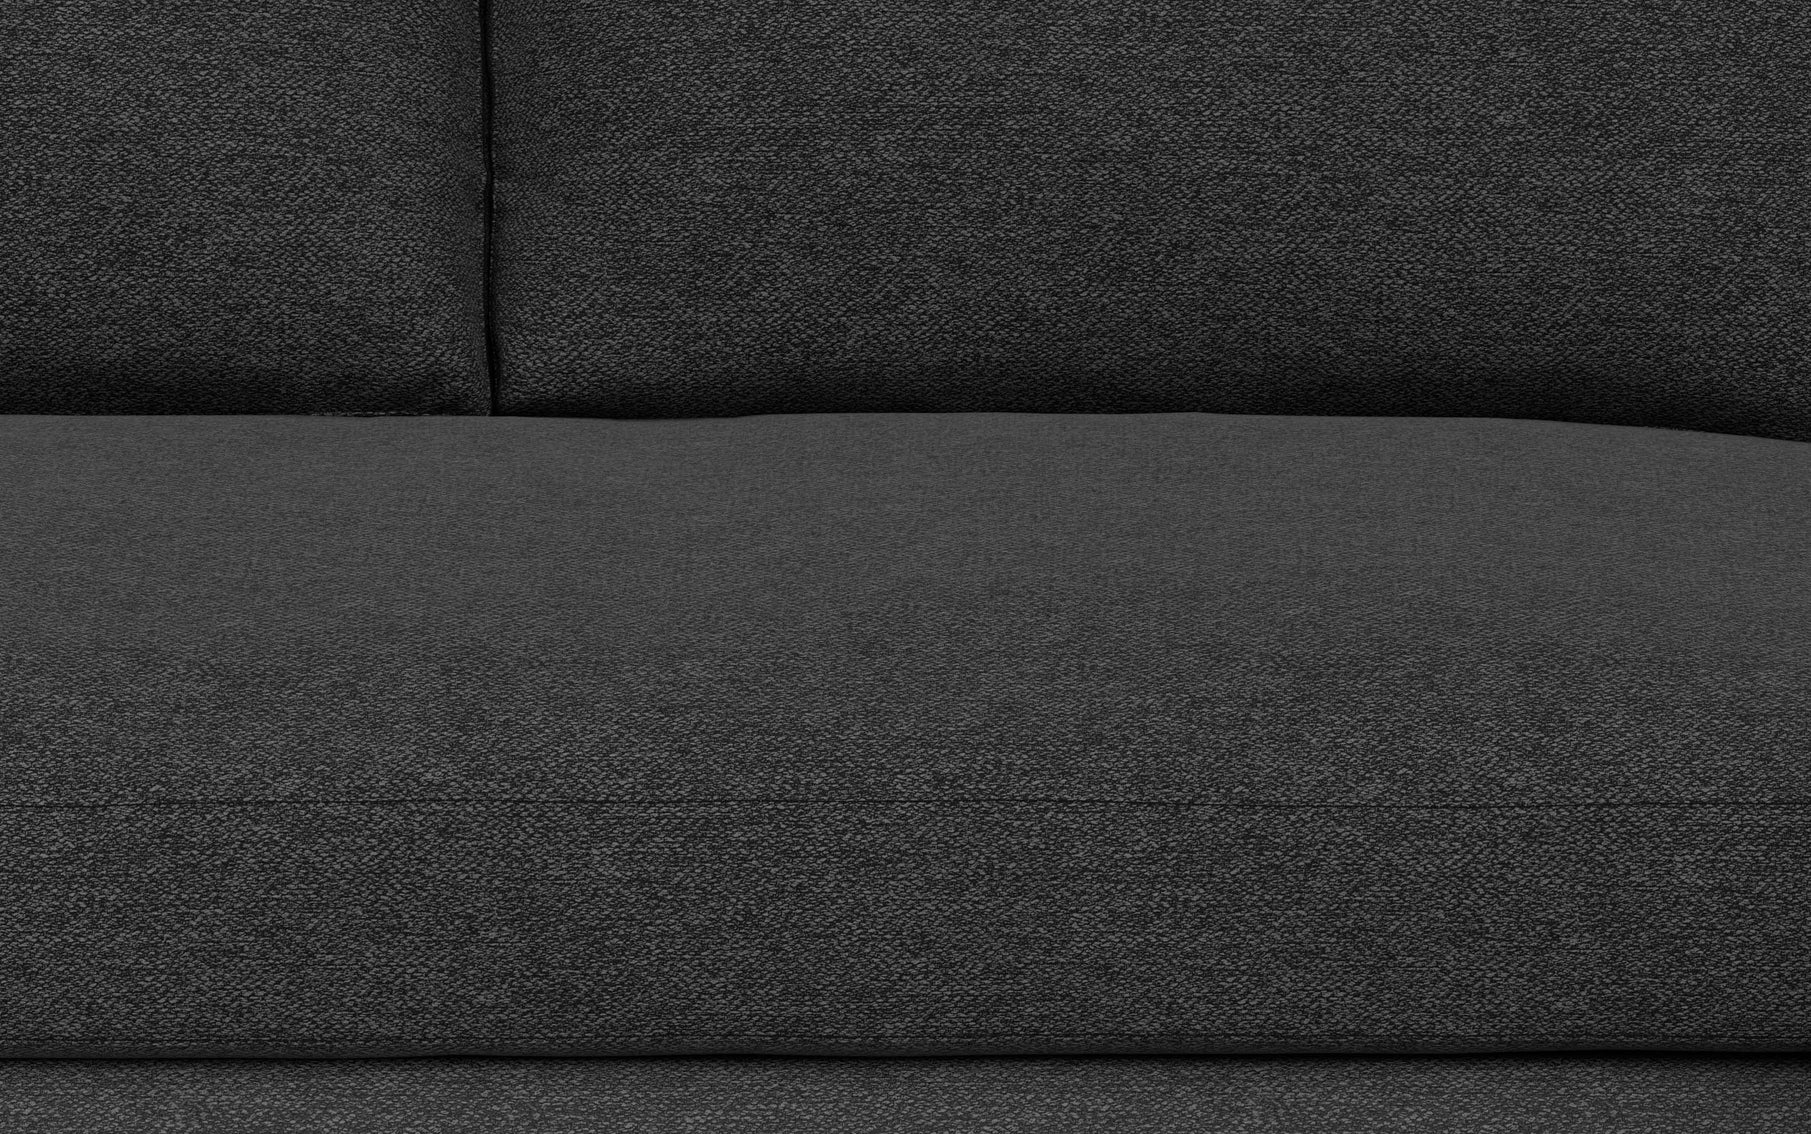 Charcoal Grey Woven-Blend Fabric | Morrison 72 inch Mid Century Sofa